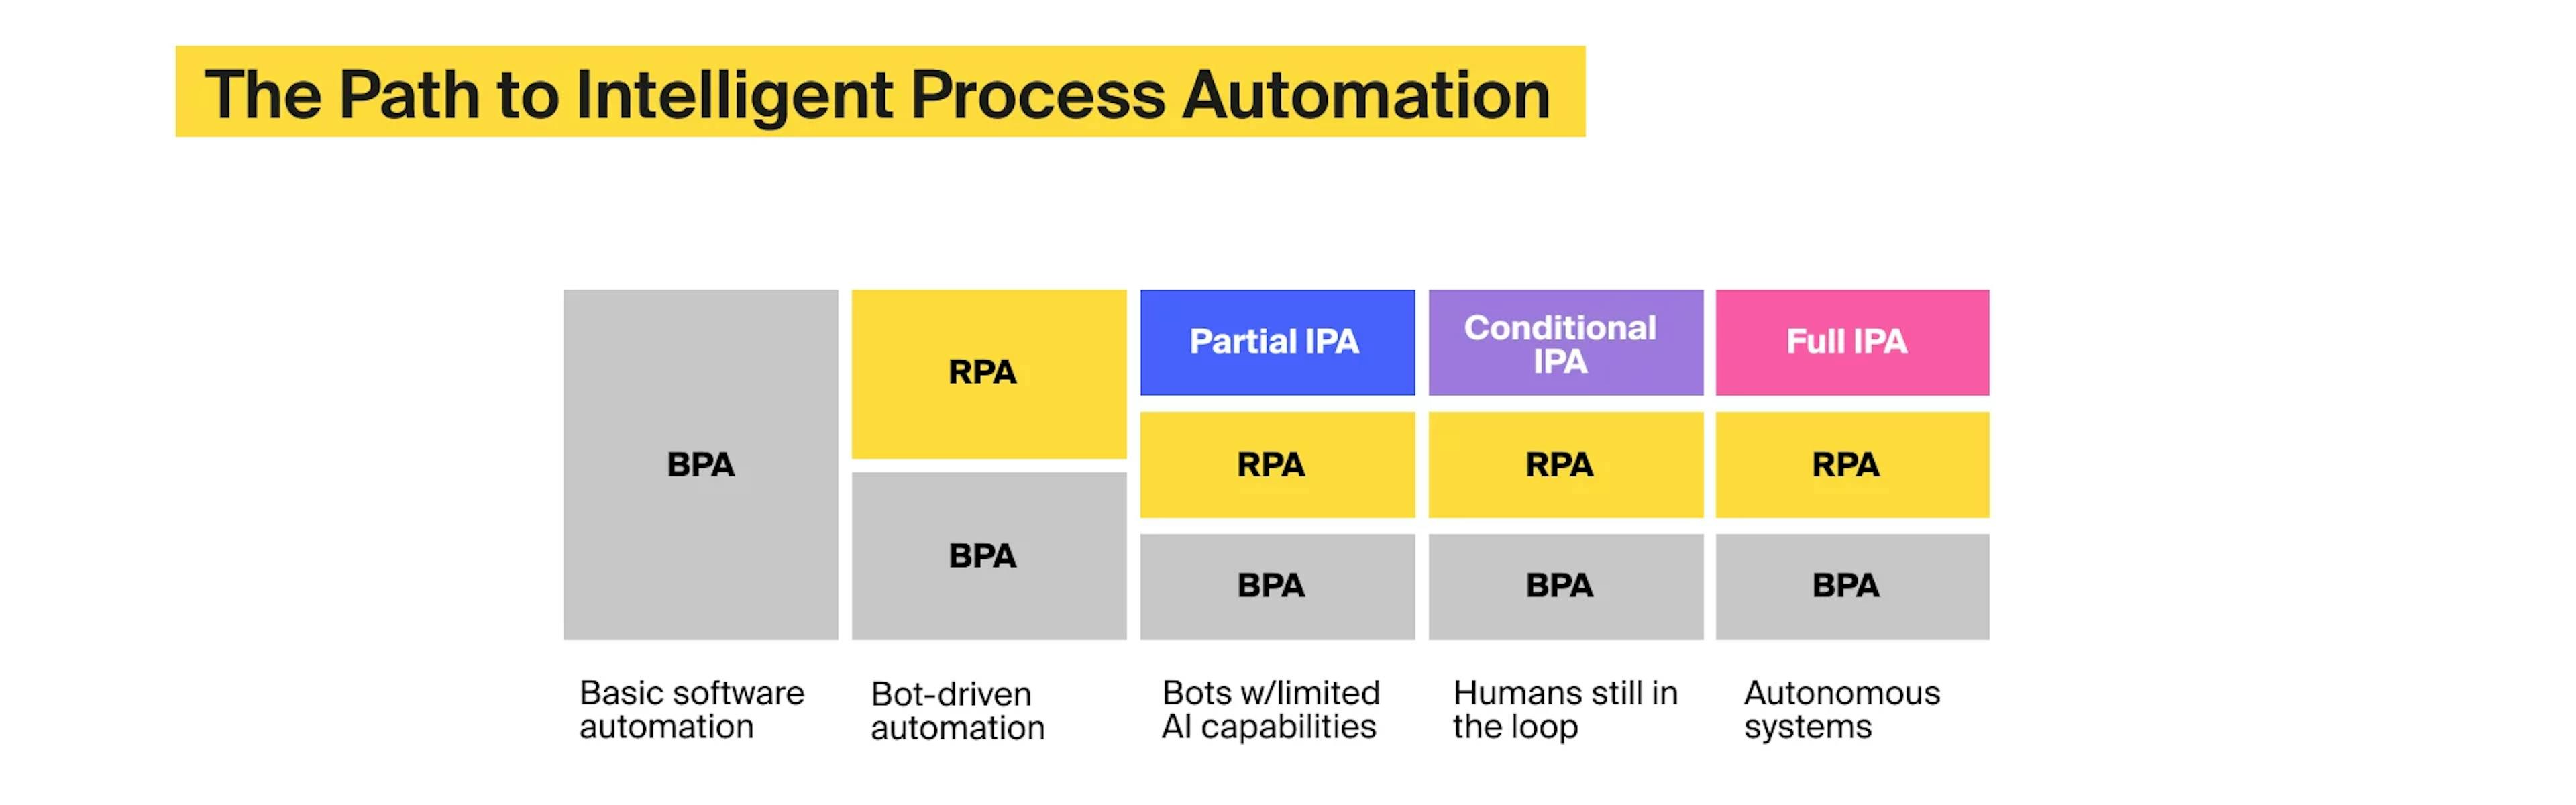 Why choose between BPA vs. RPA vs. IPA? Your company could use them all! Image source: Gradient Flow